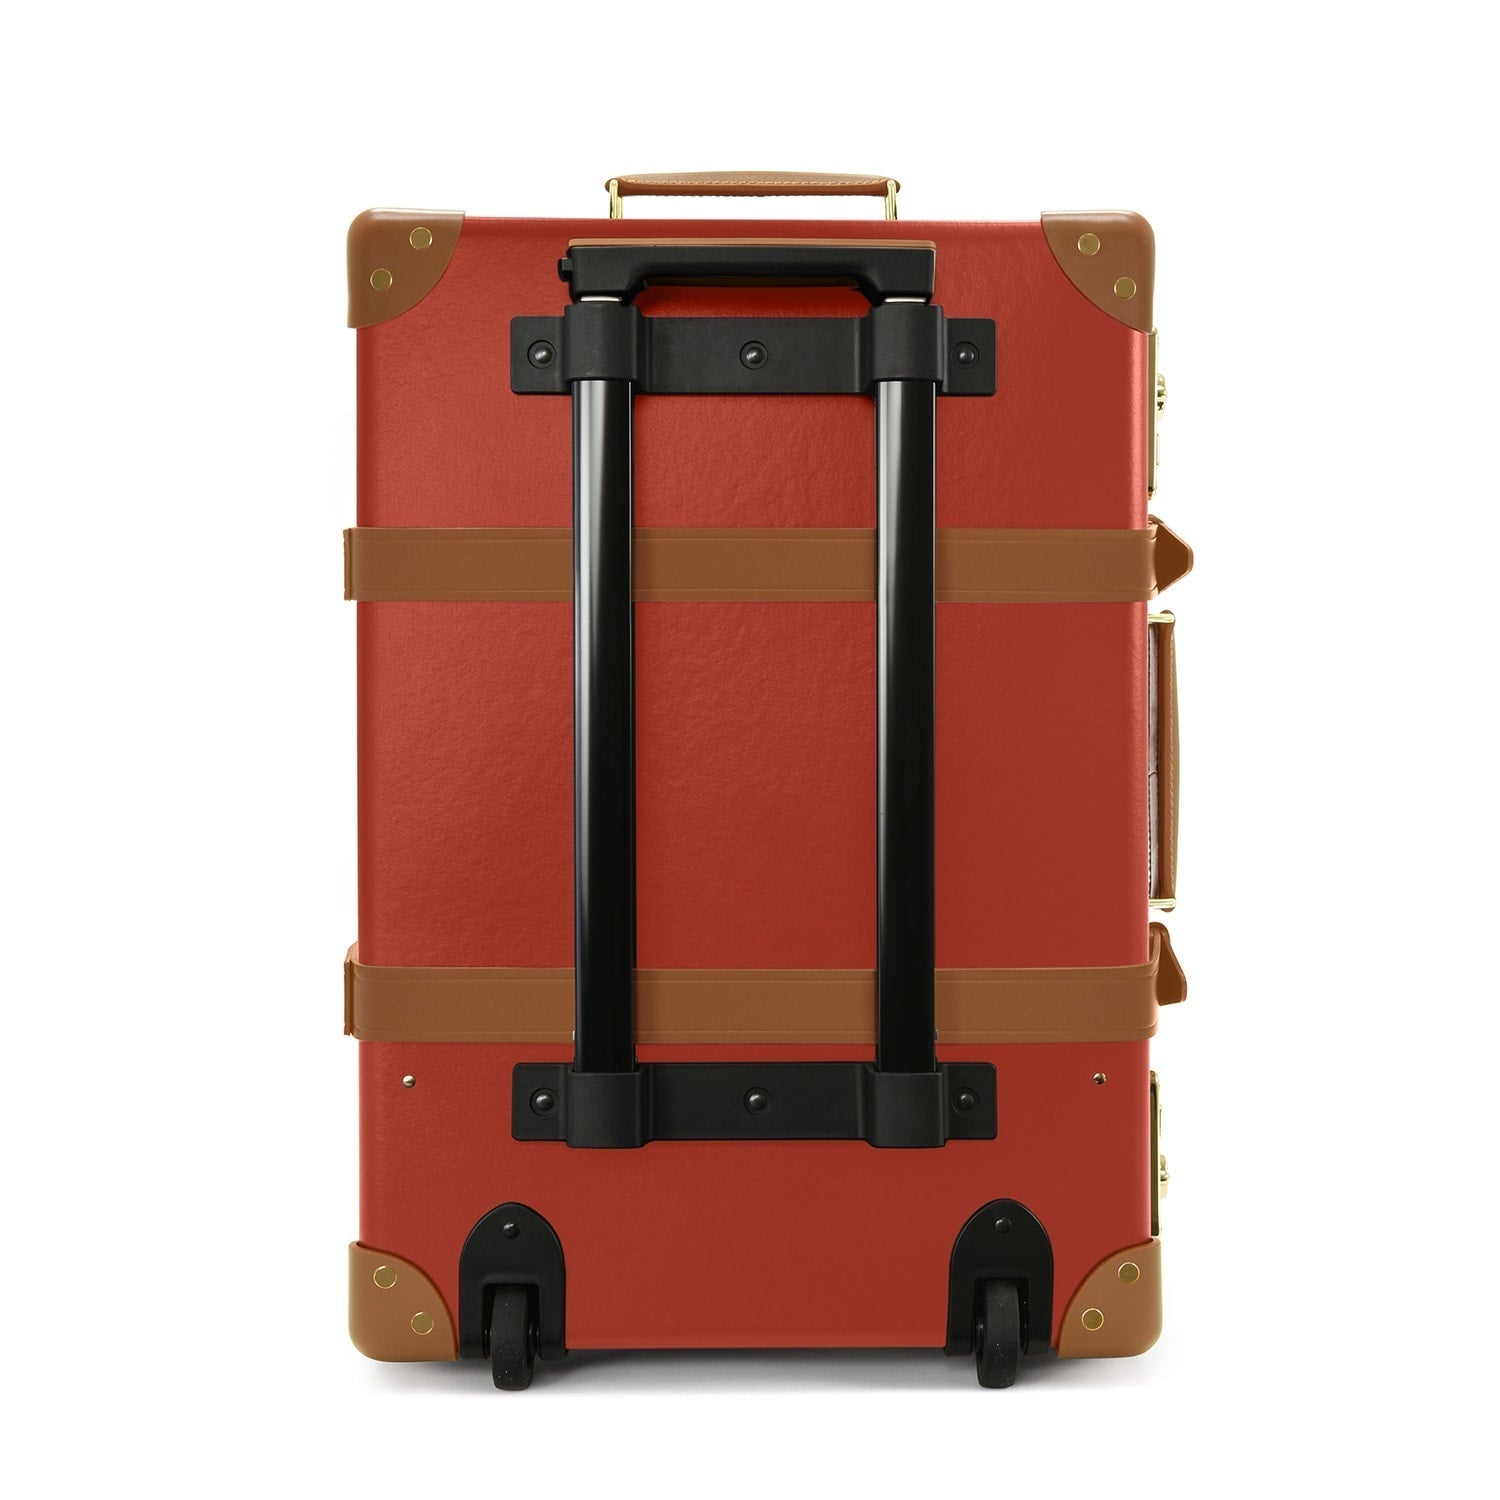 Centenary · Carry-On - 2 Wheels | Red/Caramel - Globe-Trotter Staging